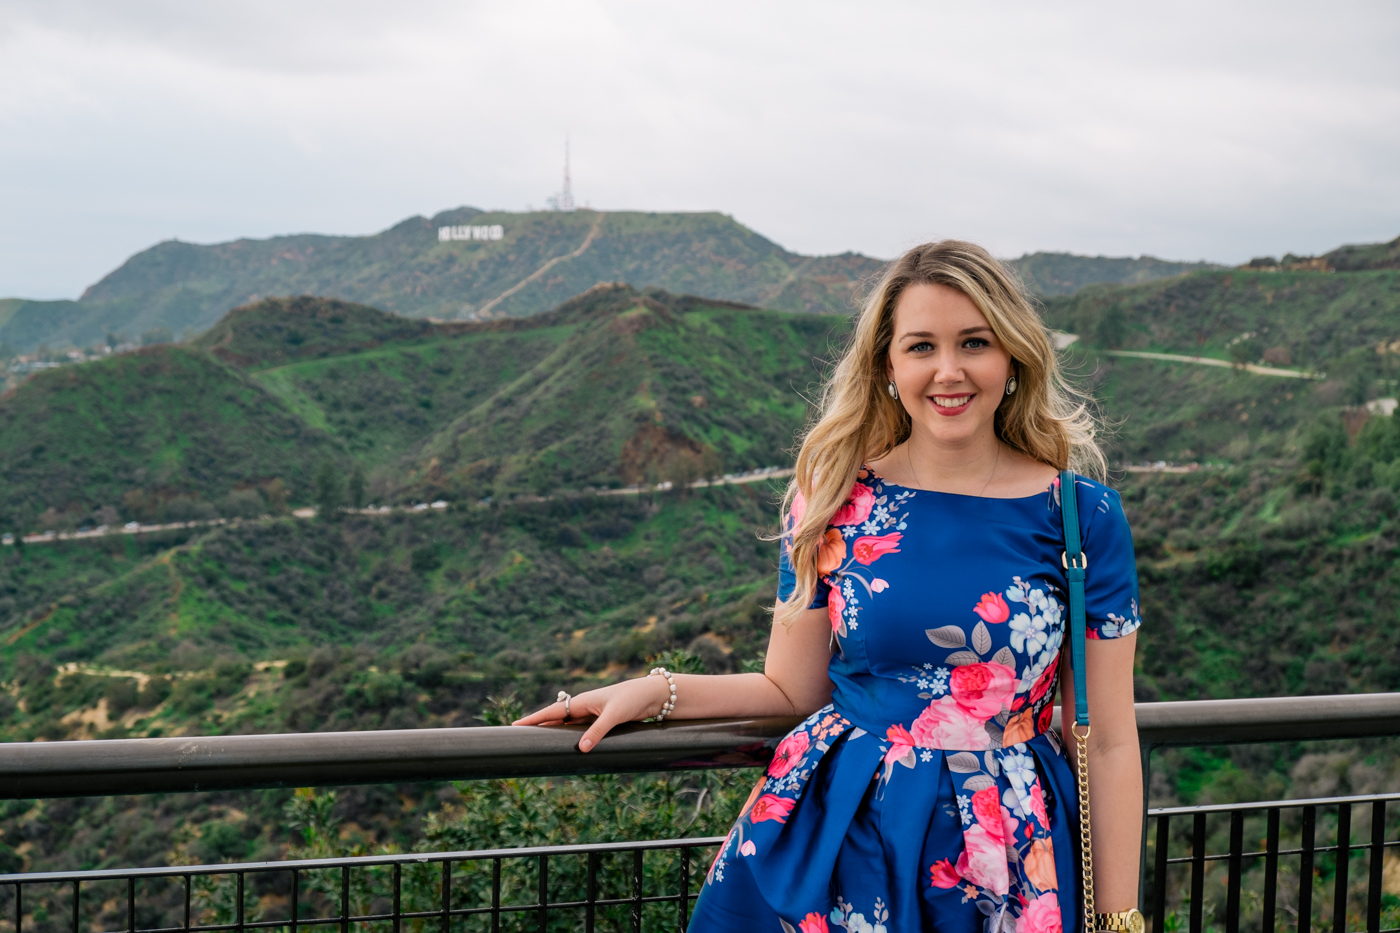 Debora Dahl, Lala land Location guide, Los Angeles, GRIFFITH OBSERVATORY, Hollywood Sign